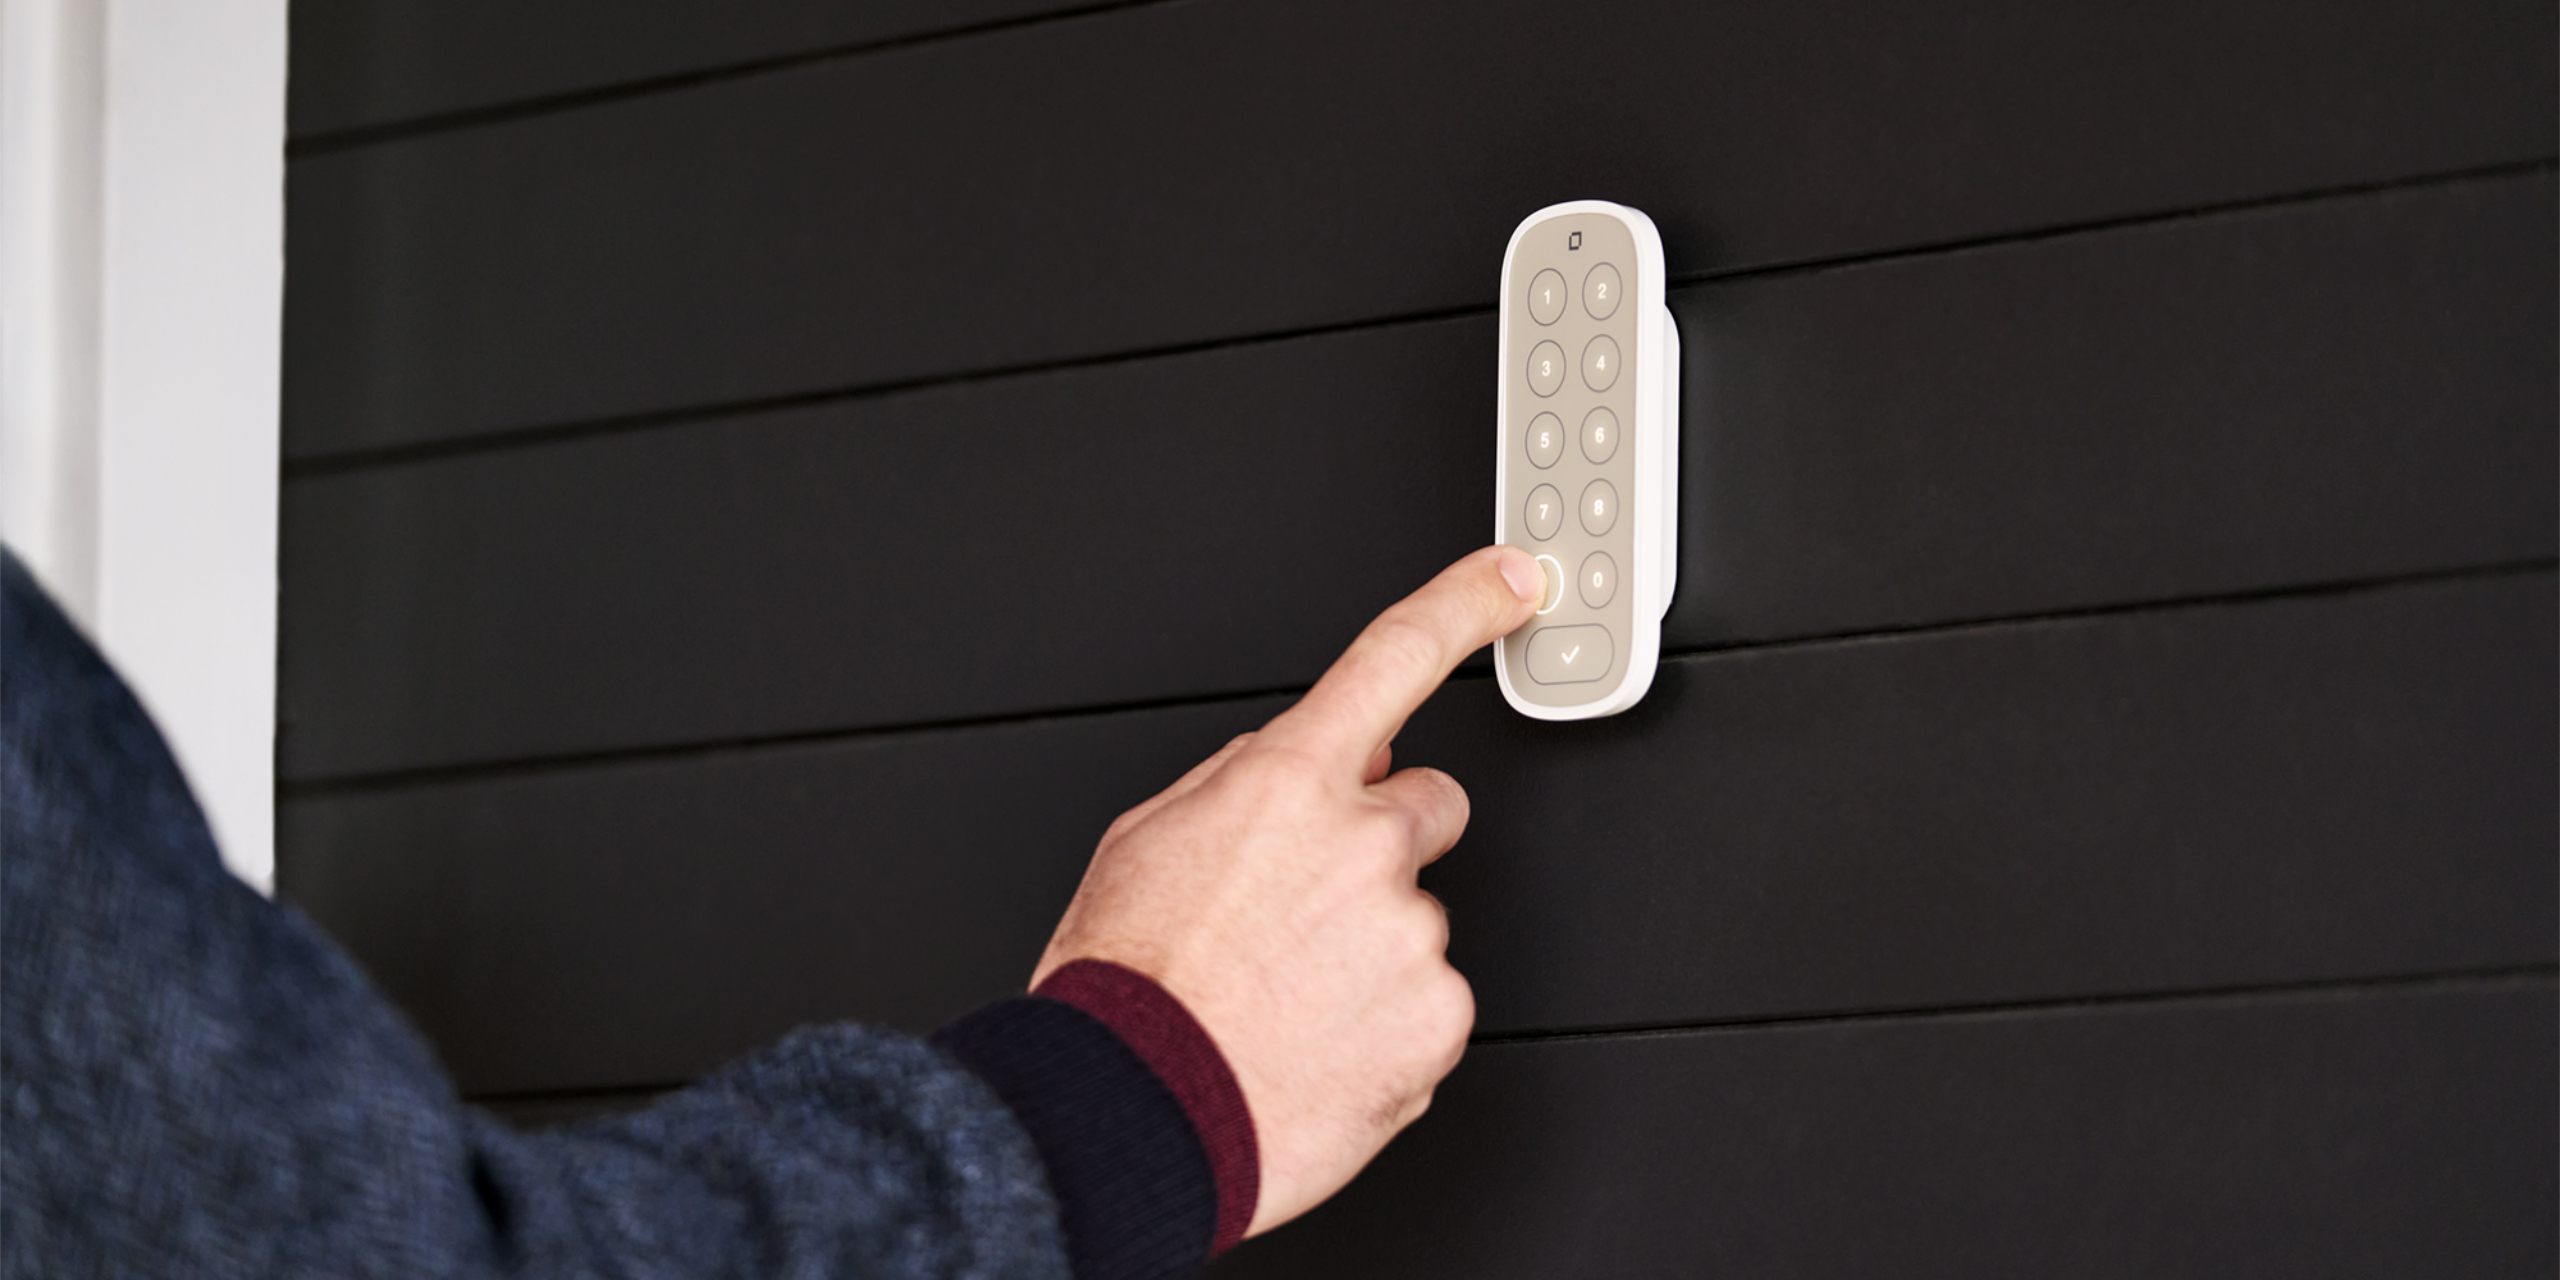 Level Keypad is a weatherproof keypad for Level Lock that lets you